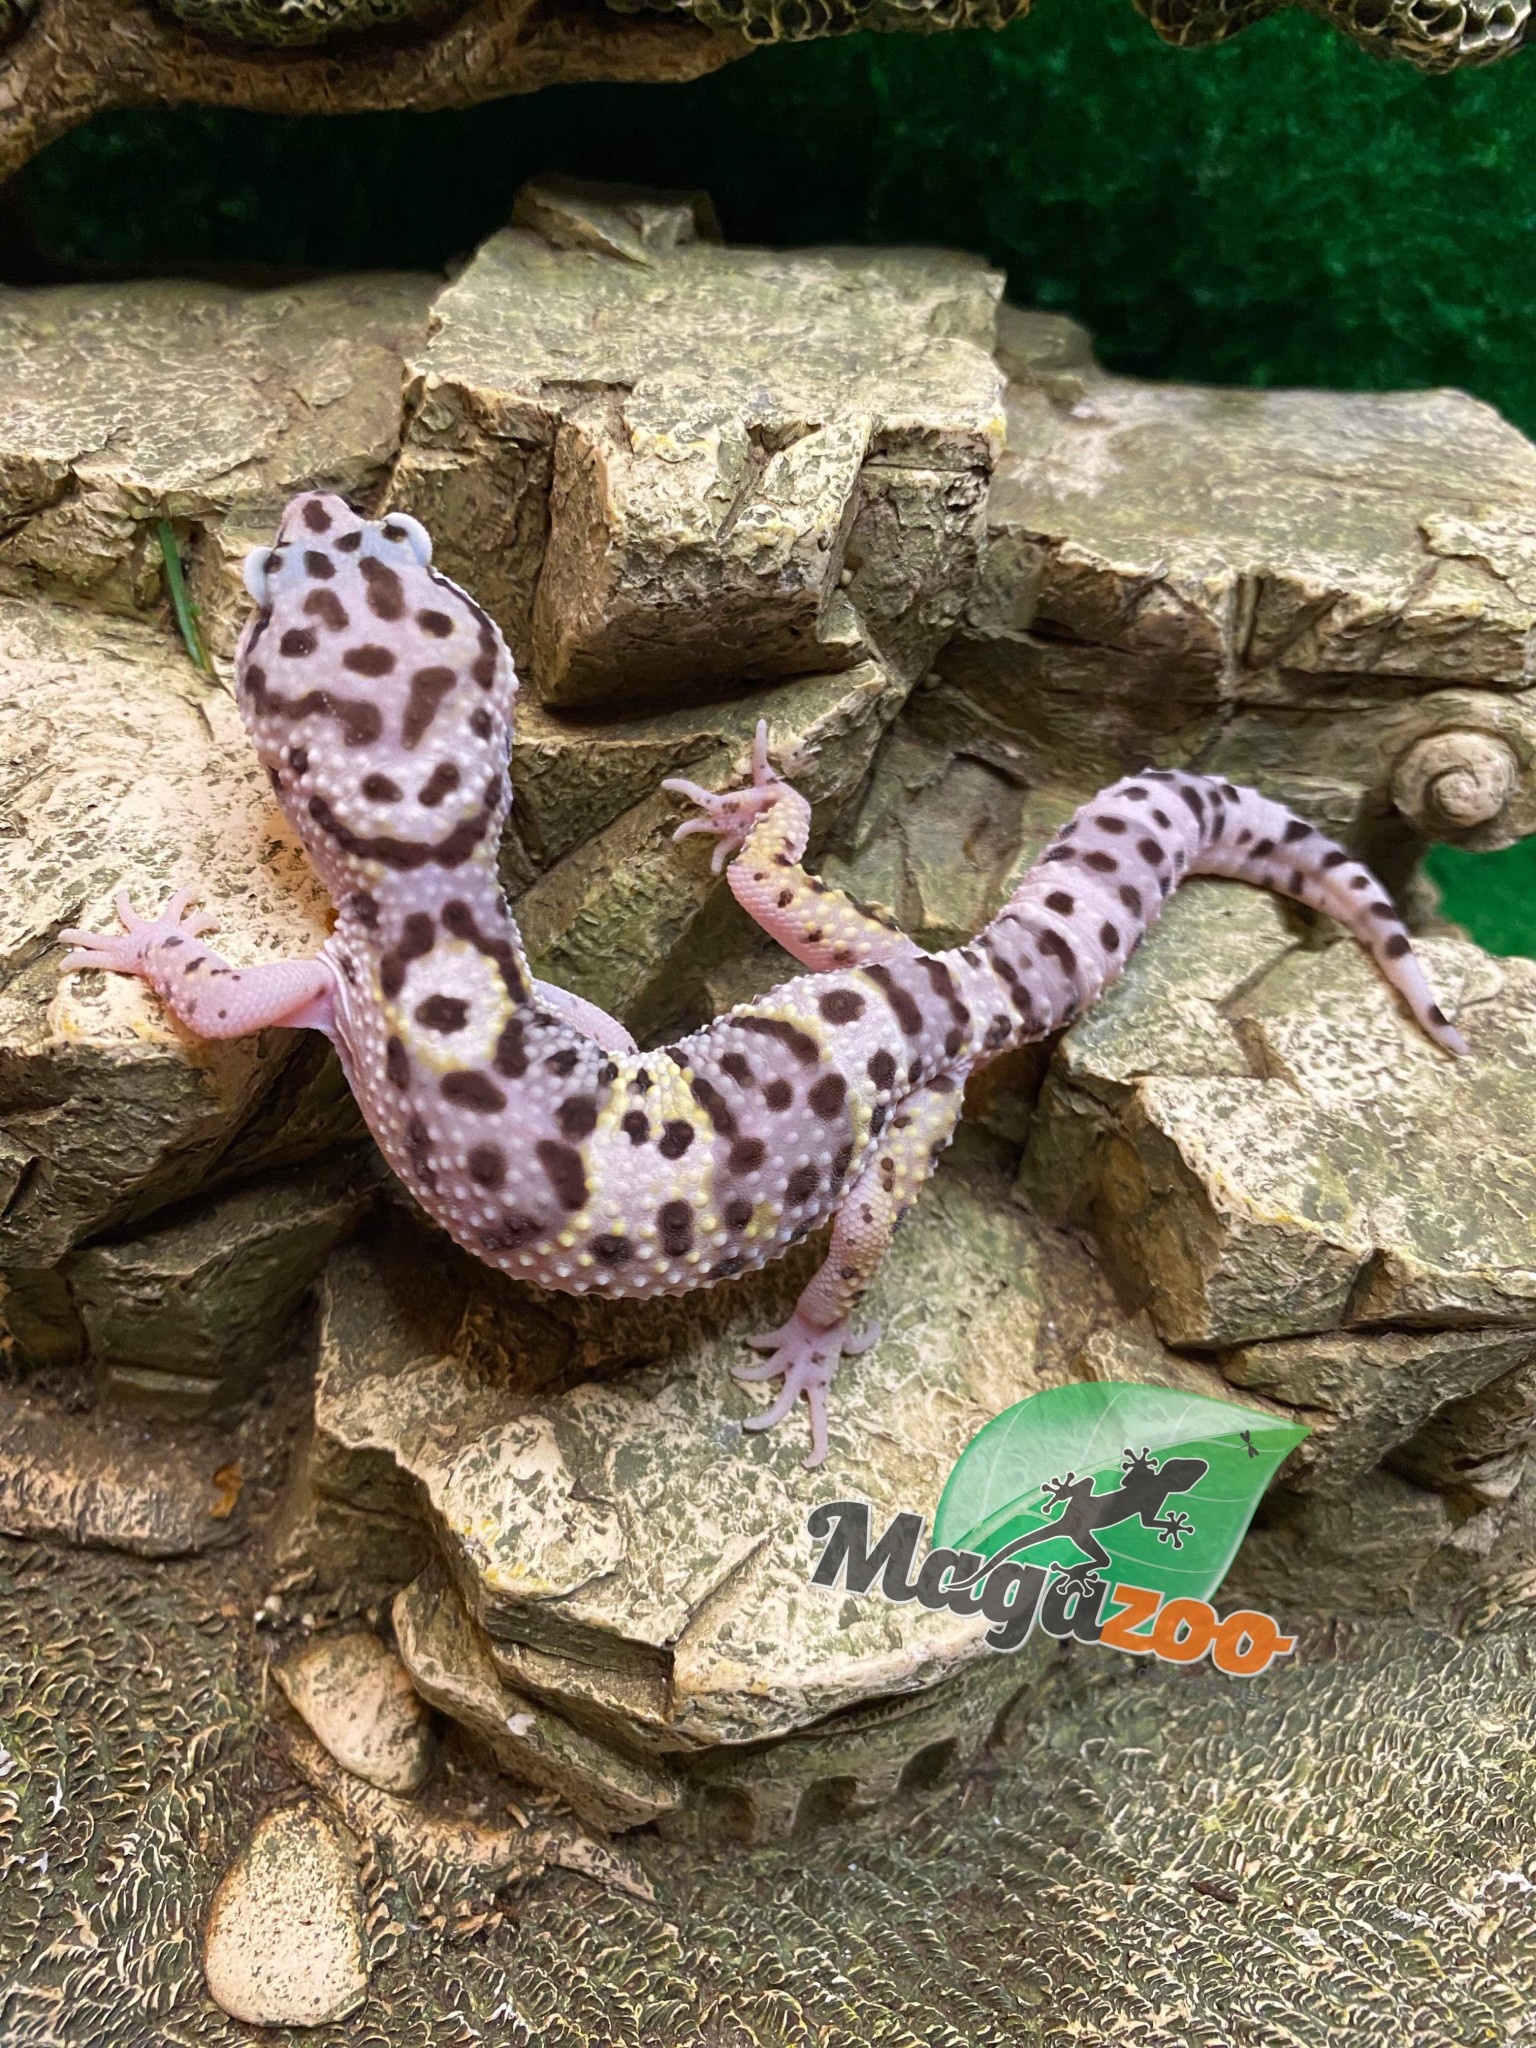 Magazoo Mack snow white and yellow Male Leopard gecko 6/14/23 #24 (SPECIAL ORDER)